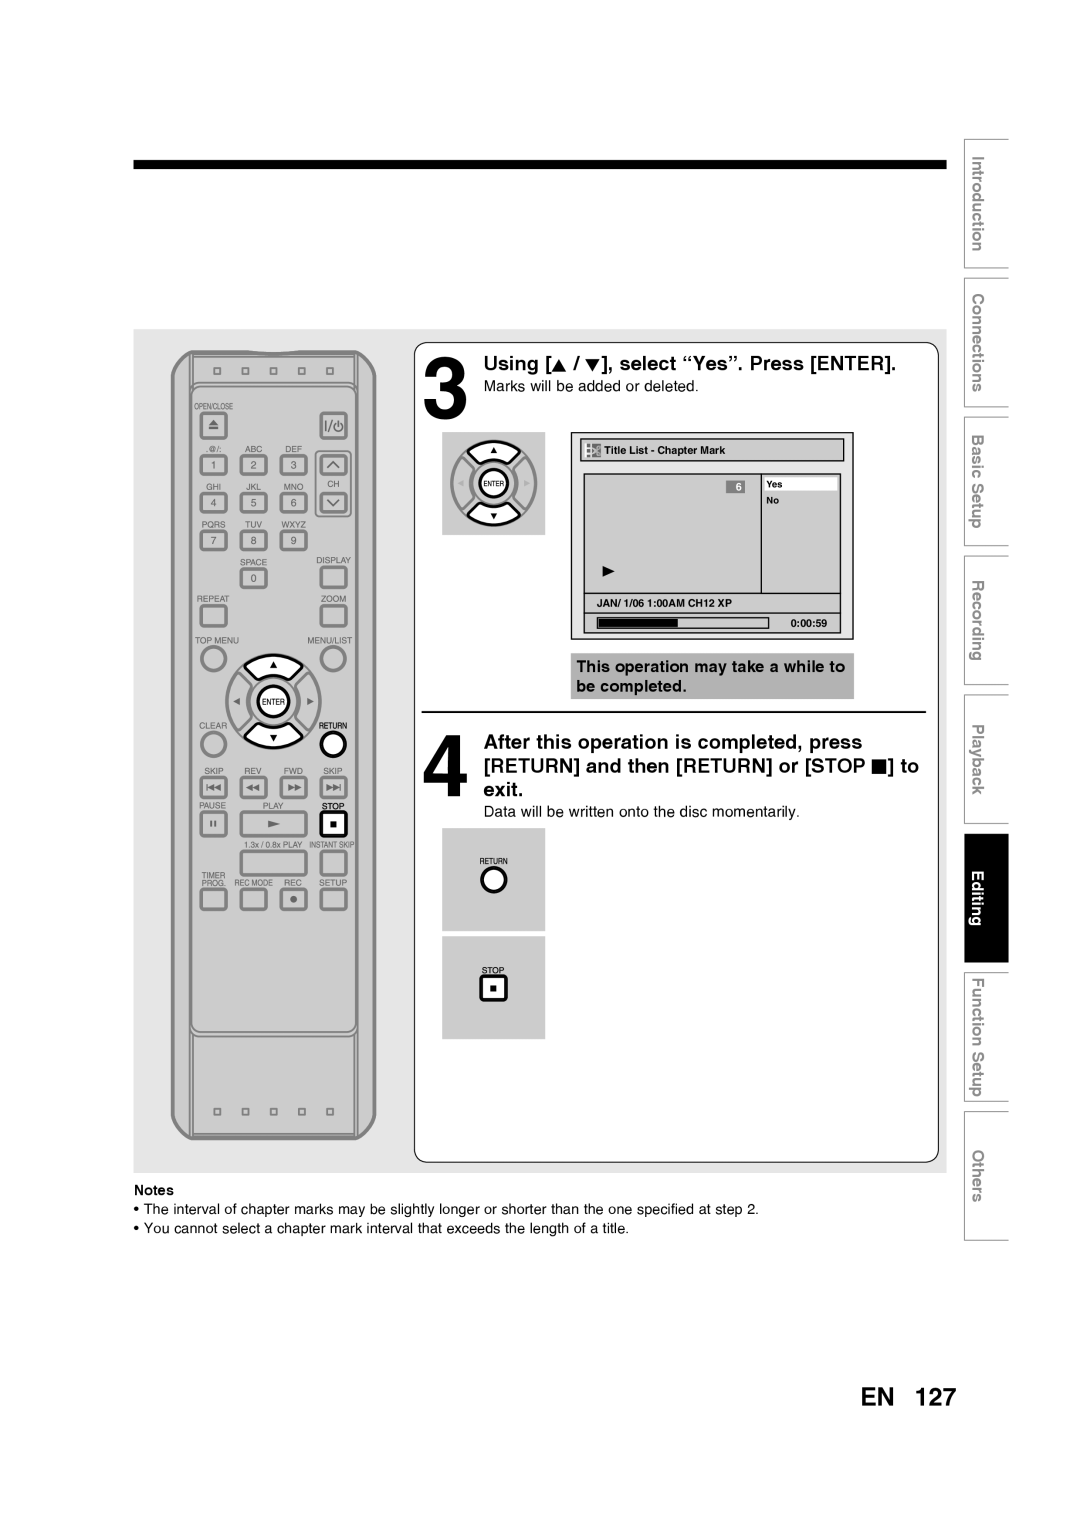 Toshiba D-RW2SU/D-RW2SC manual Using K / L, select “Yes”. Press ENTER, This operation may take a while to be completed 